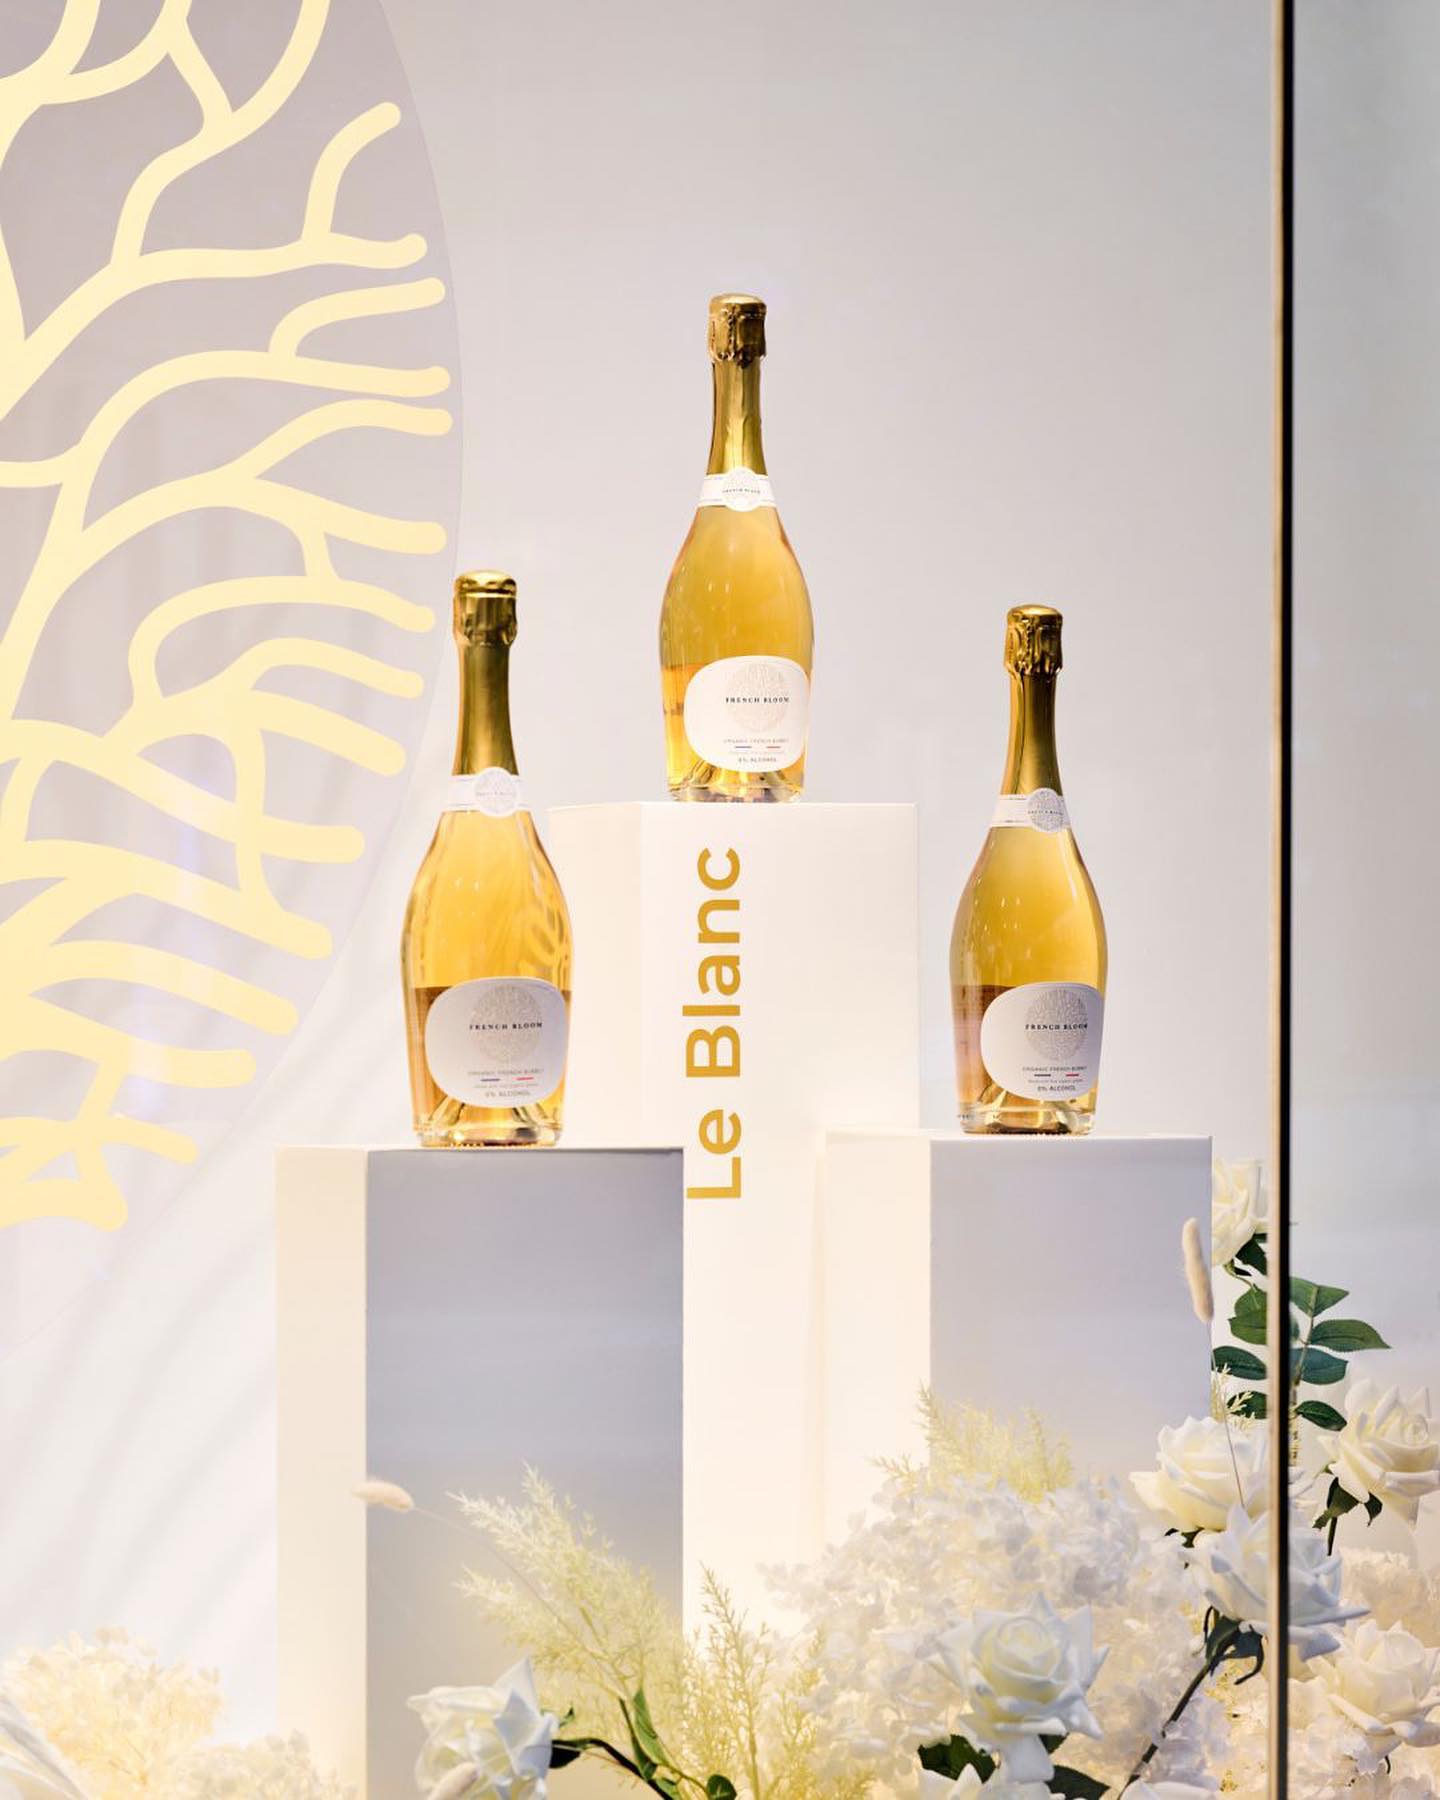 The blanc french bloom